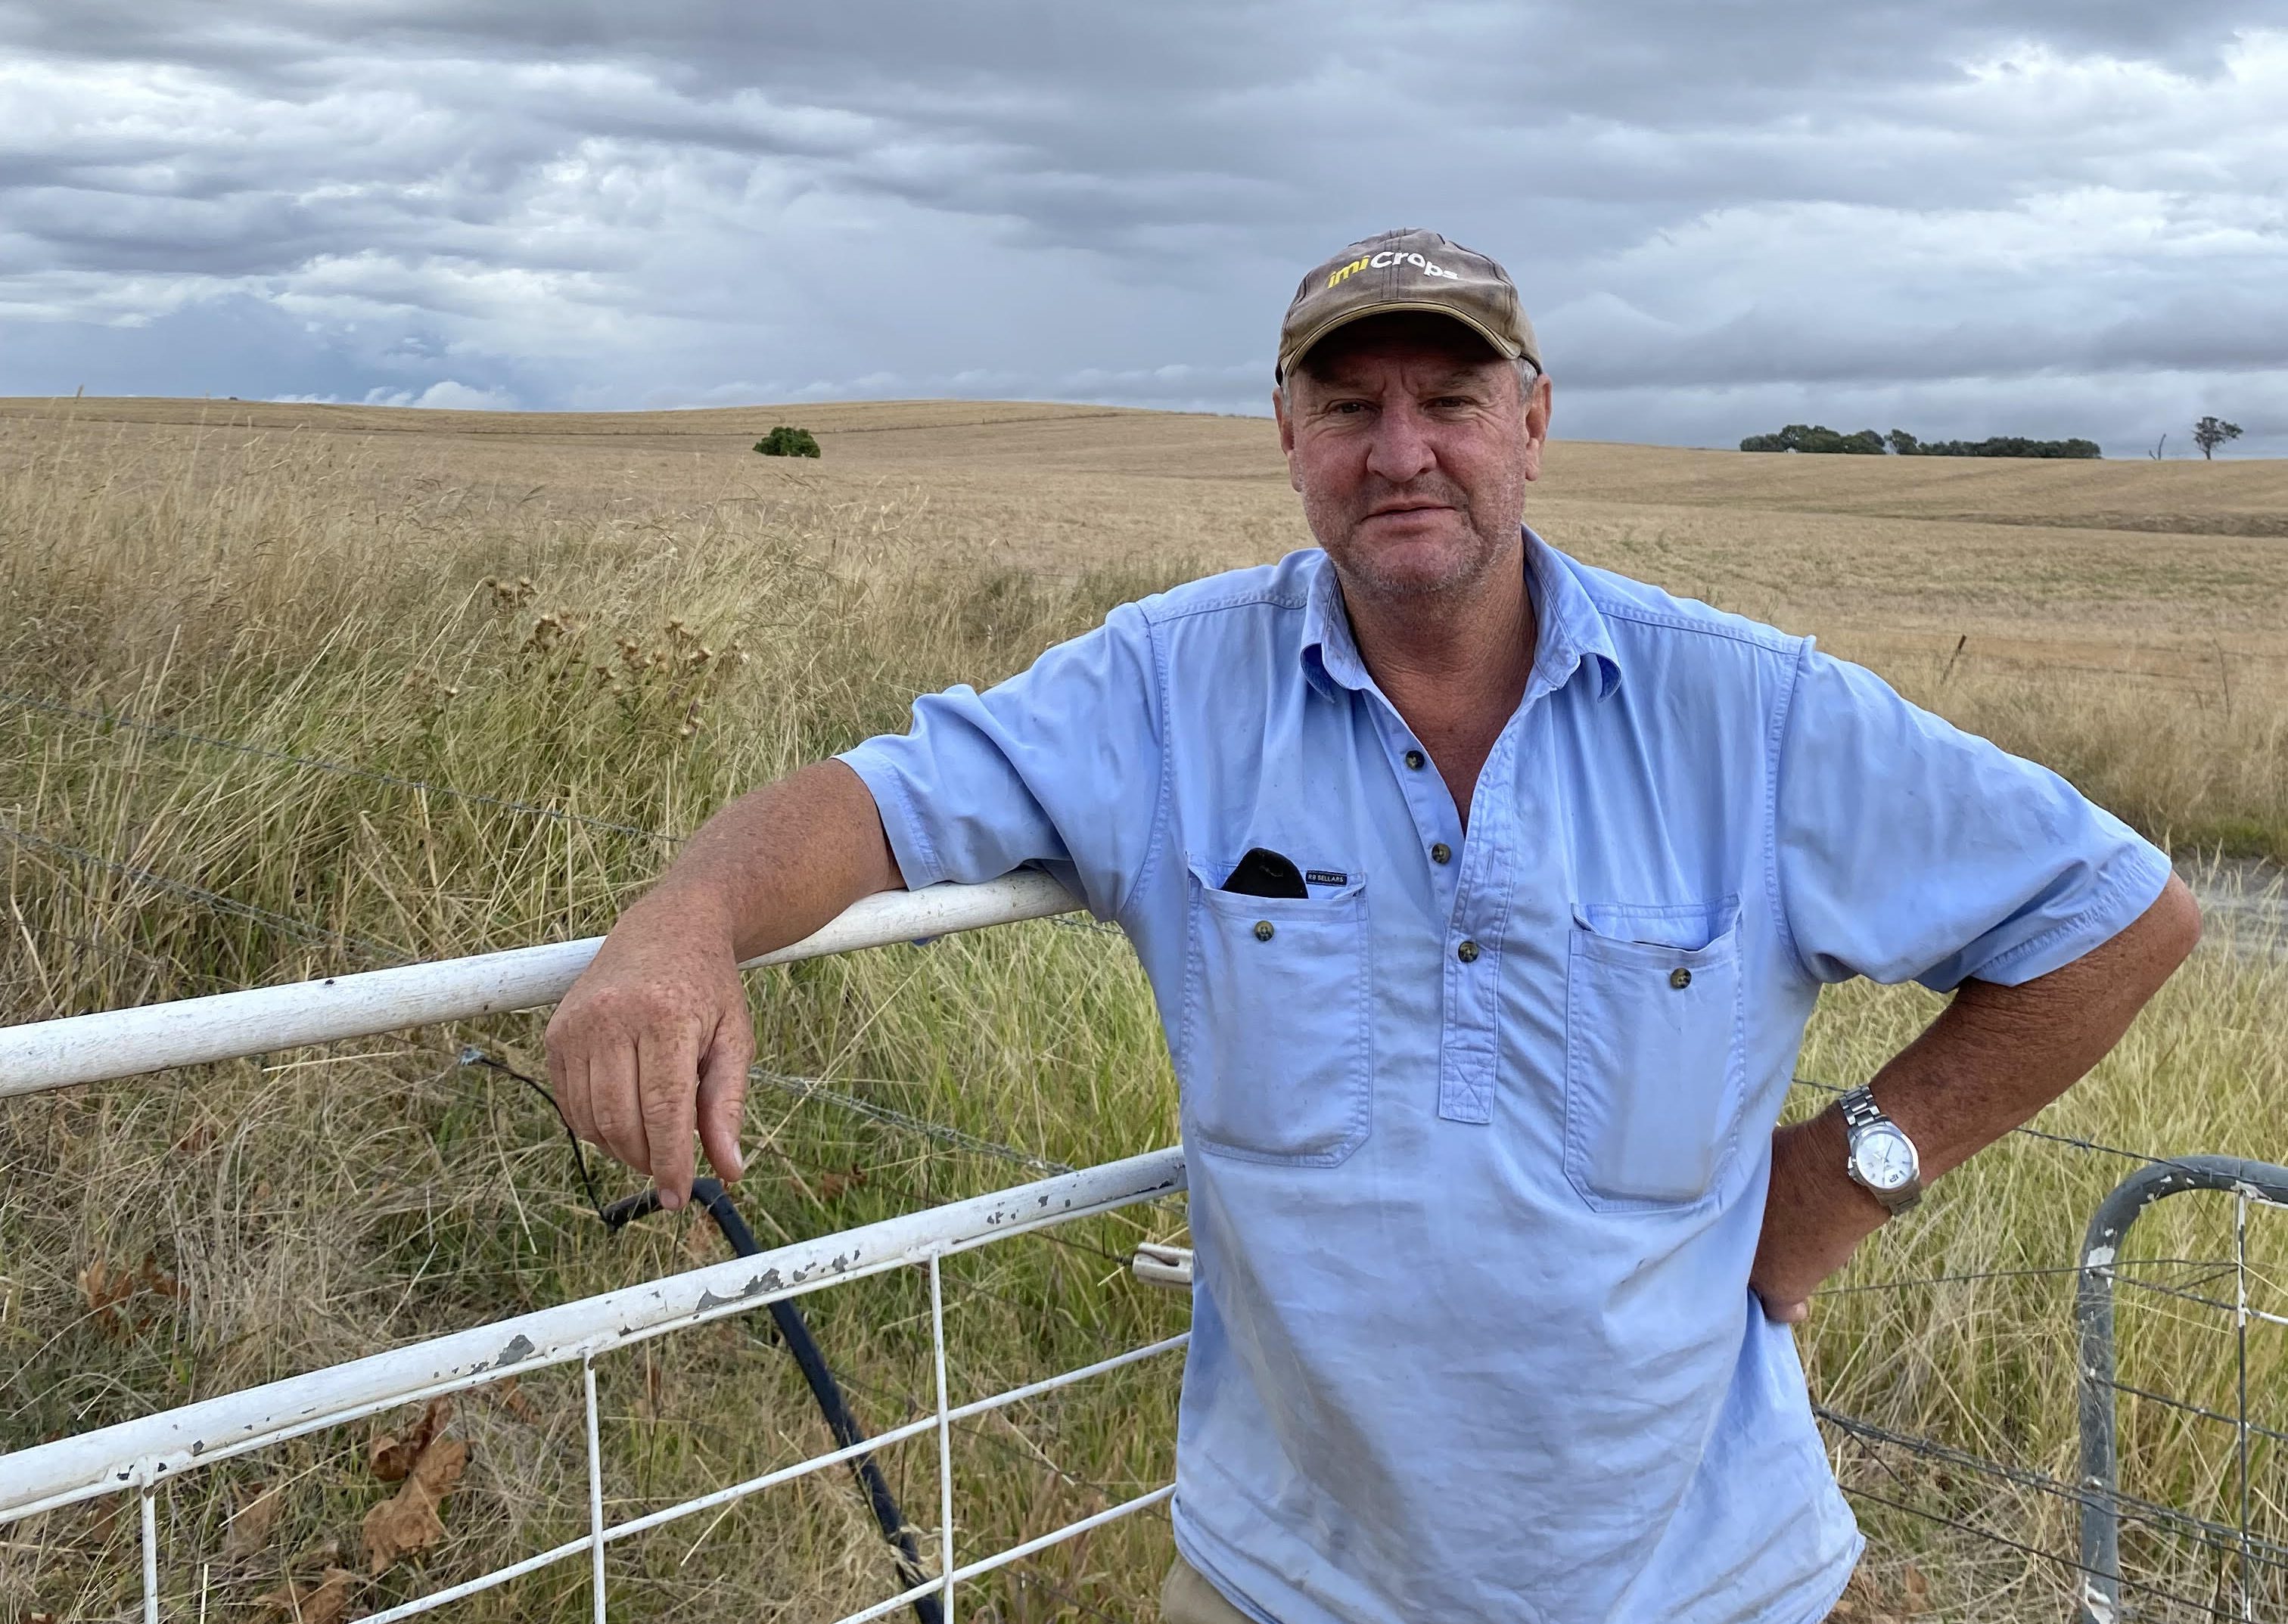 Maxwell landowners to fight 'chase for profits' solar farm project just outside of Wagga